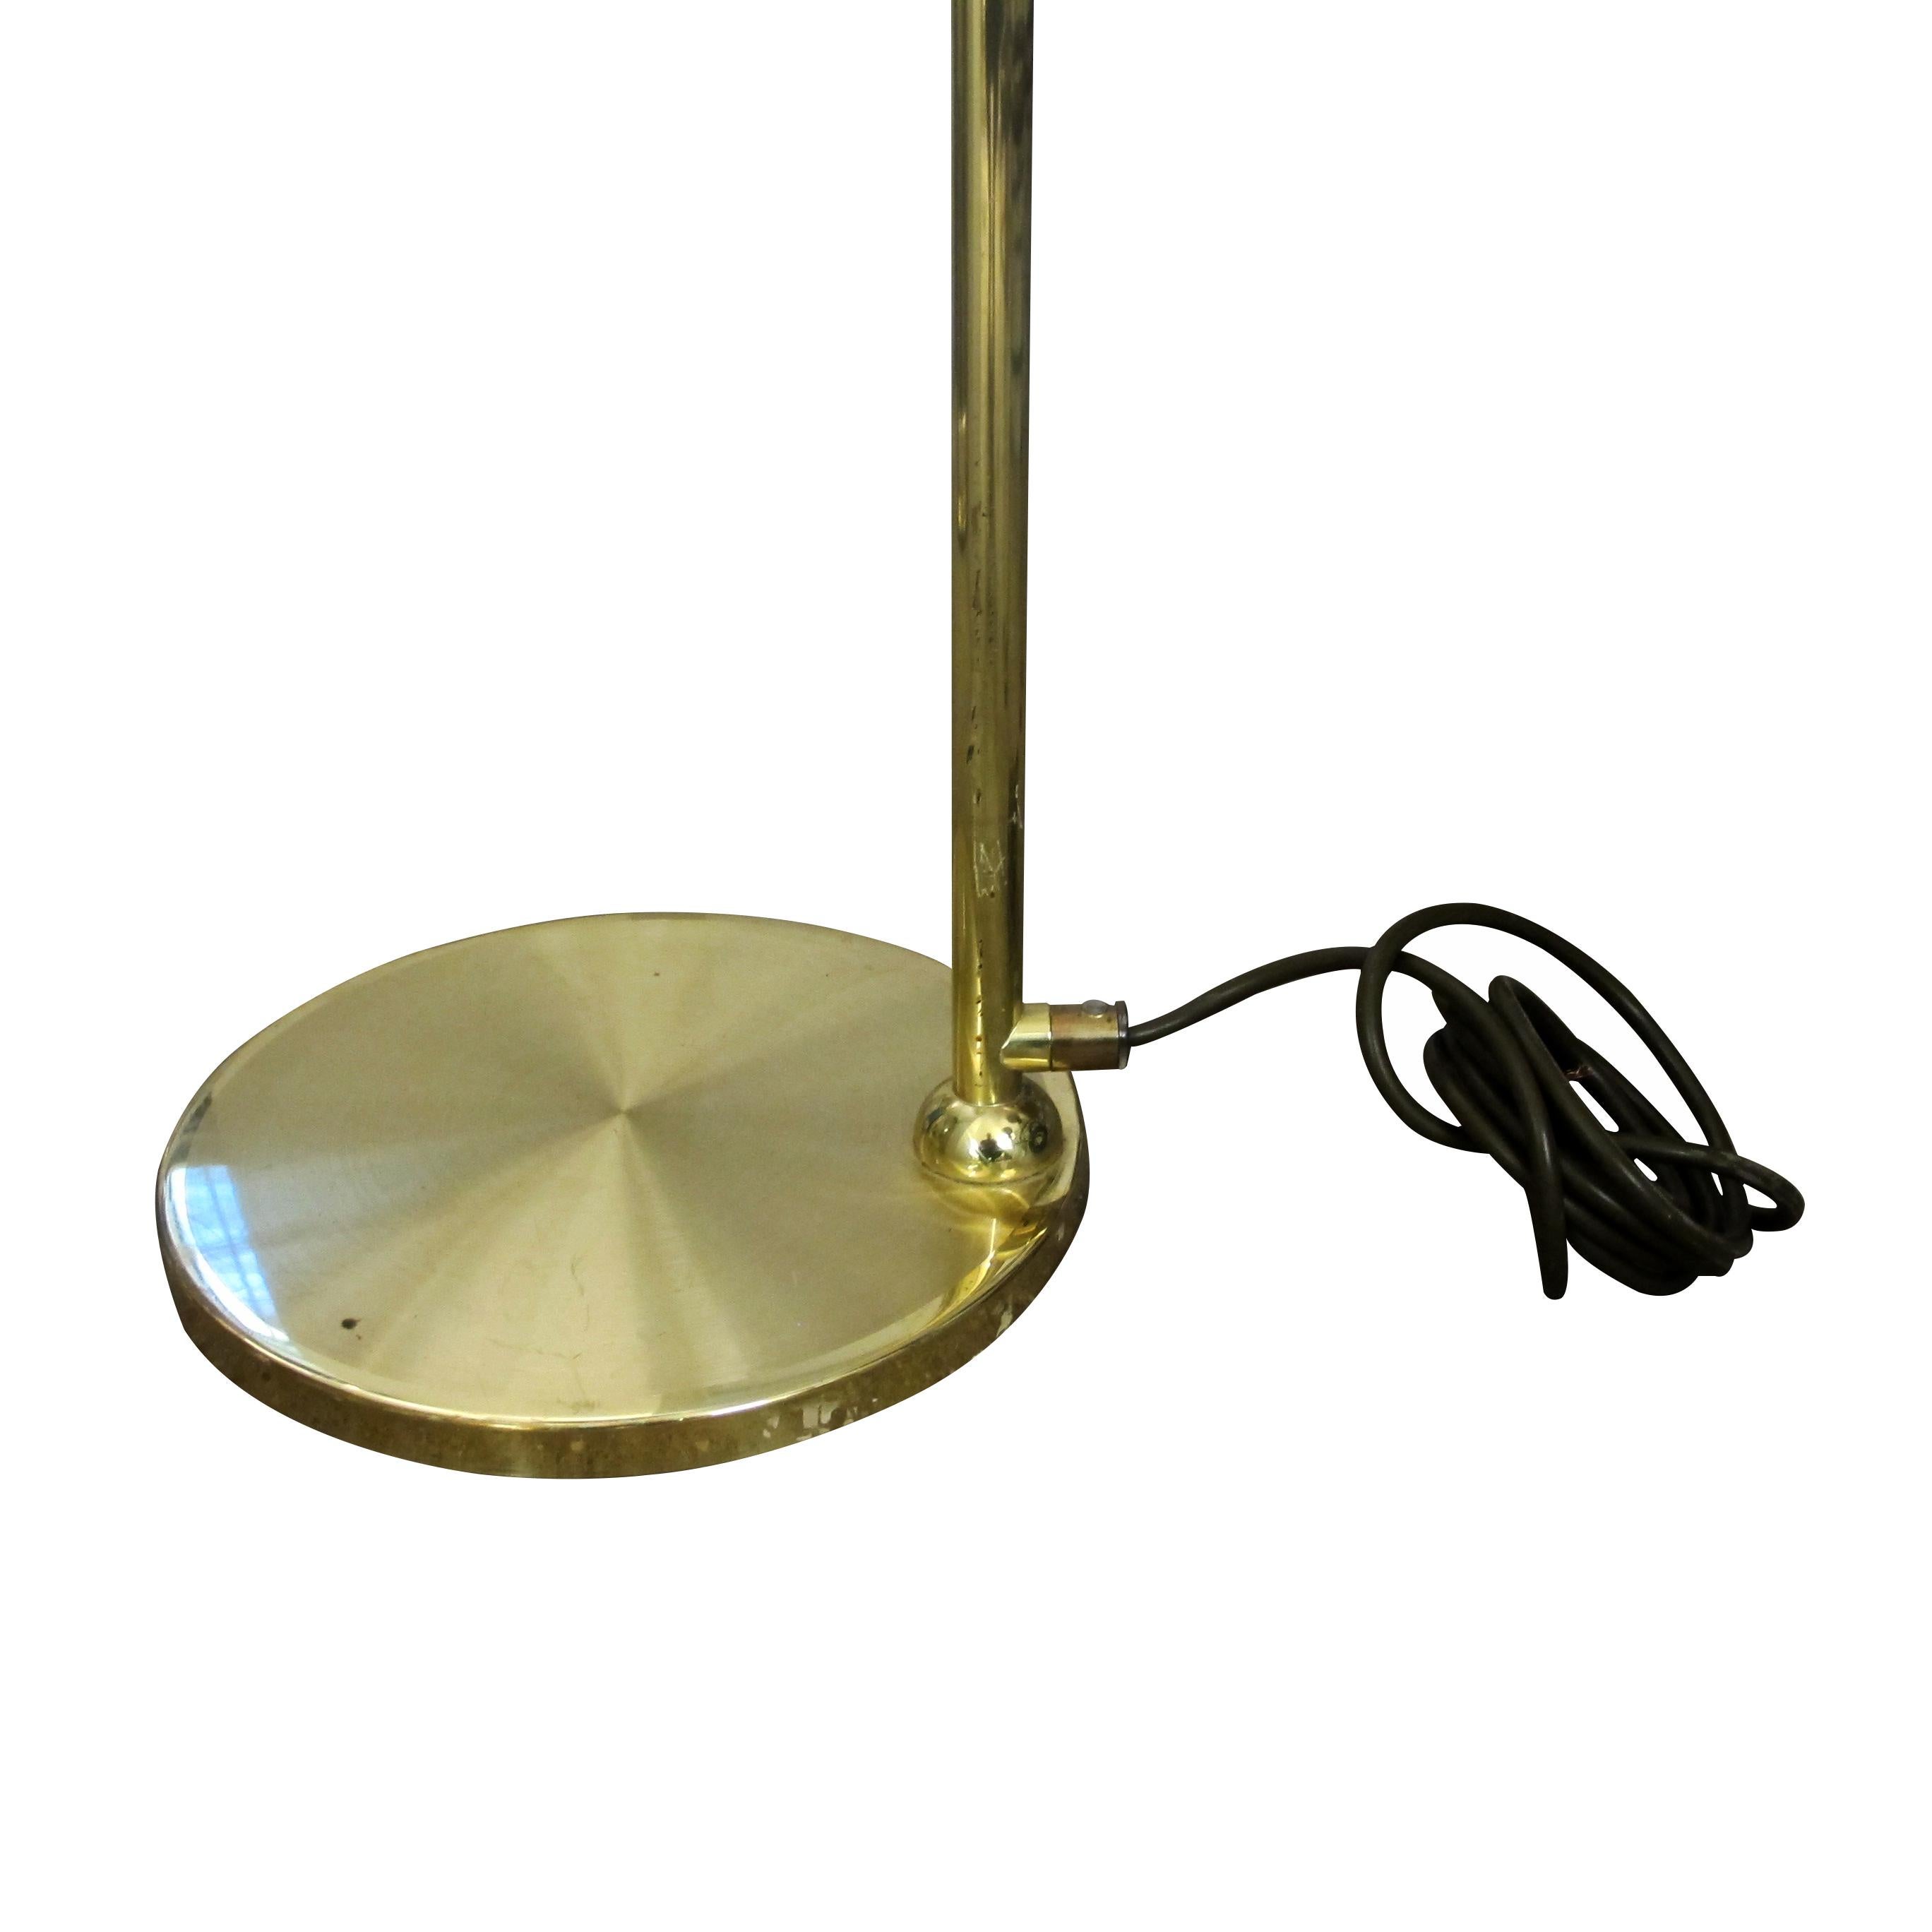 1970s Pair of Brass and Metal Bracket Floor Lamps White Shades, Swedish  For Sale 5